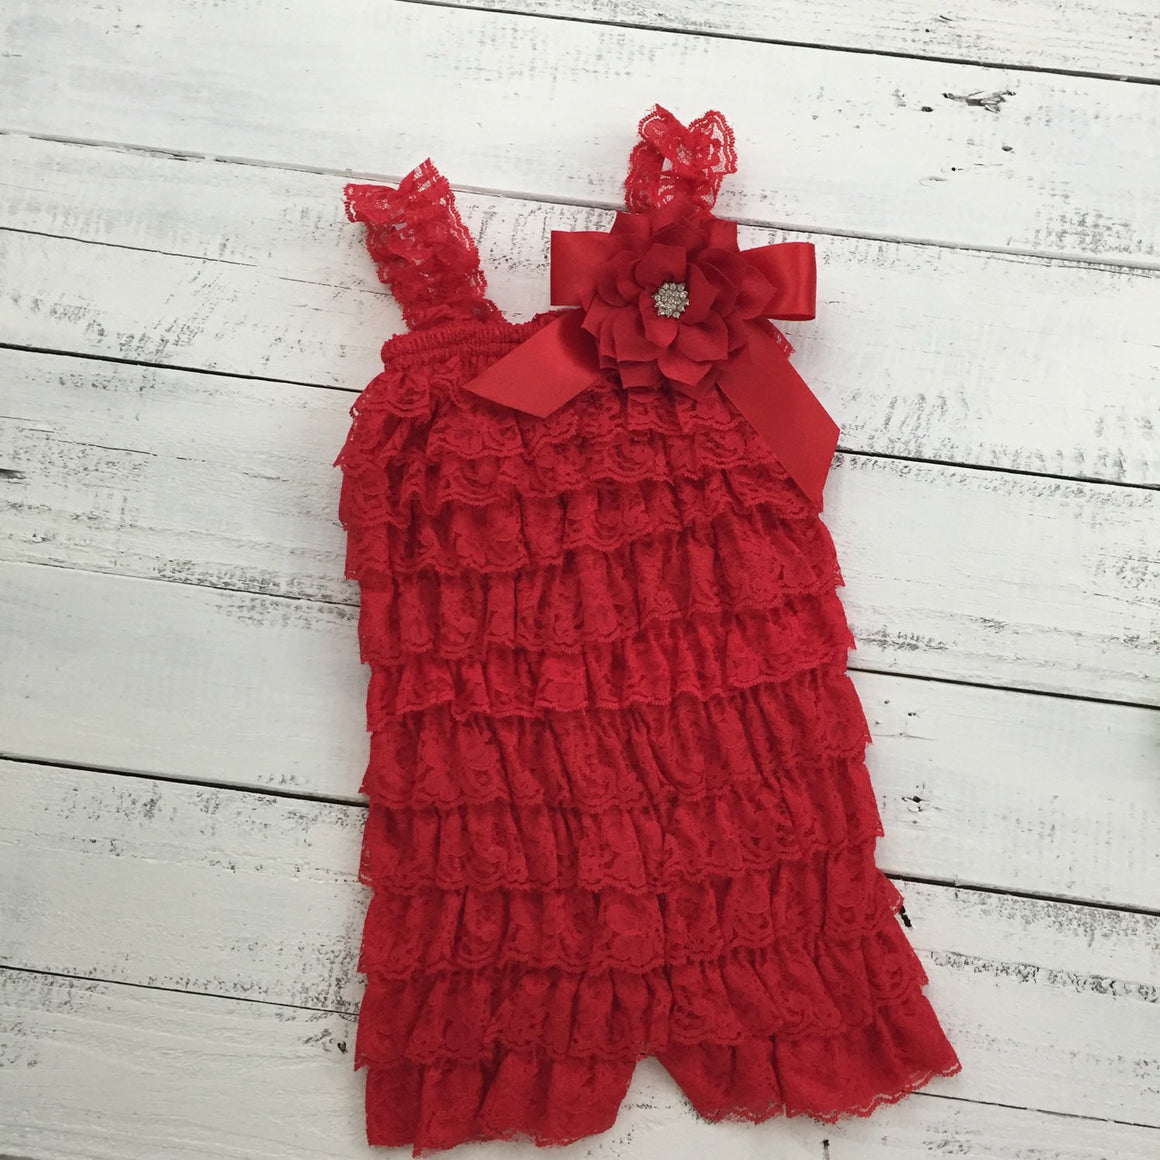 Lace Romper - Christmas Red Lace Petti Romper and matching poinsettia headband - HoneyLoveBoutique